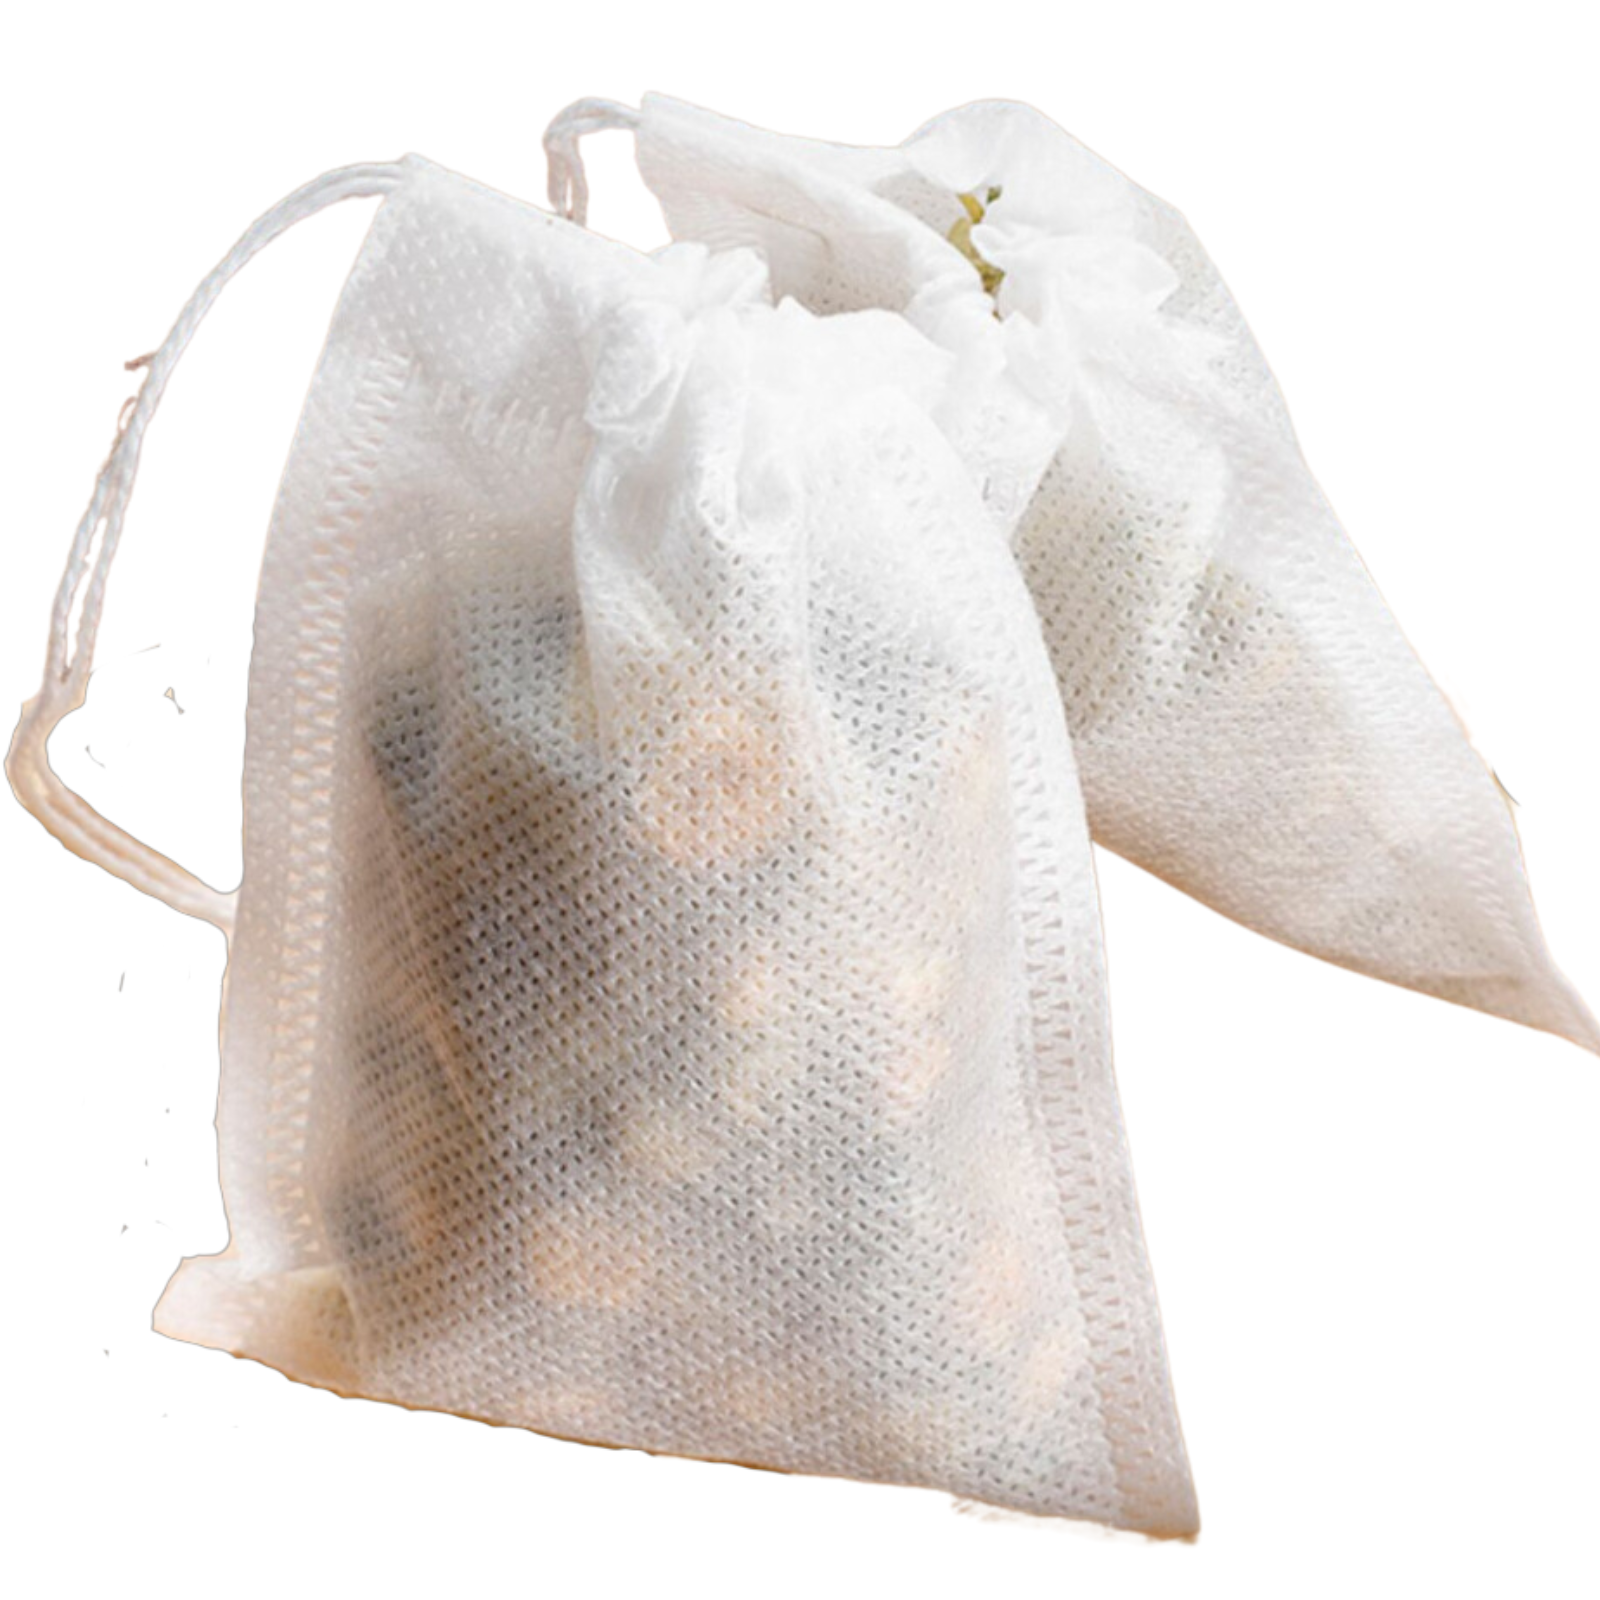 150 Disposable Tea Filter Bags for Loose Tea, Soup Ingredients, Herbs, –  PerfectKitchenCo